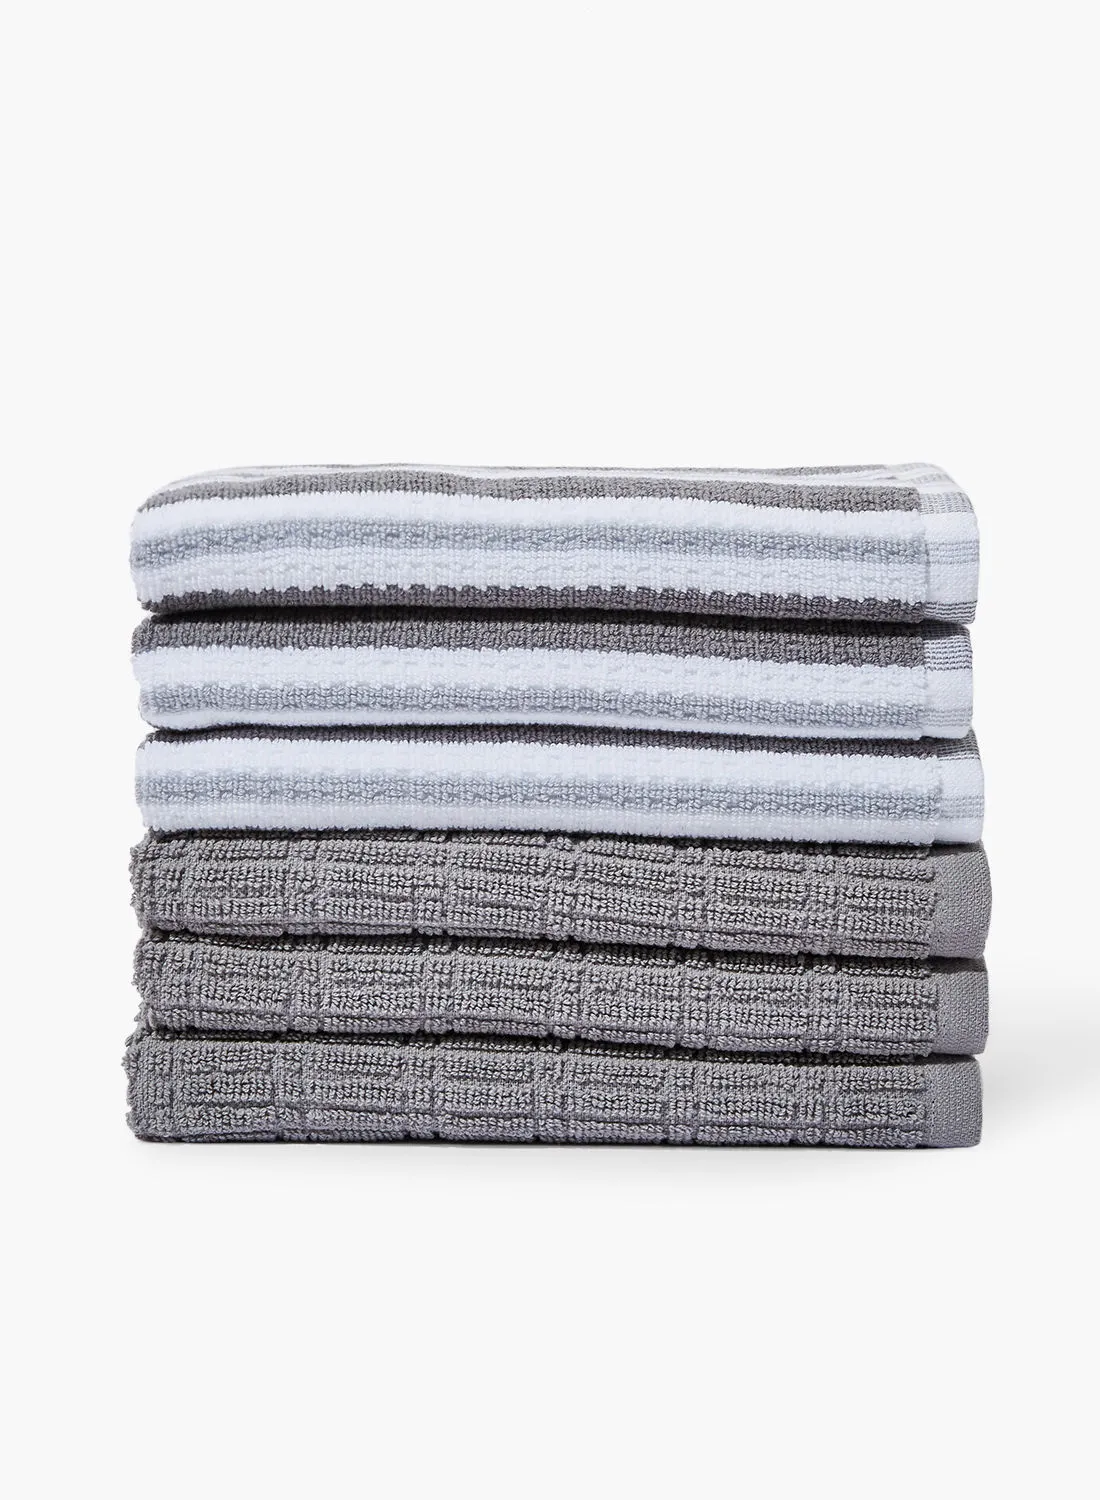 Amal 6 Pack Bathroom Towel Set - 393 GSM 100% Cotton Solid And Yarn Dyed - Grey/White Color -Quick Dry - Super Absorbent